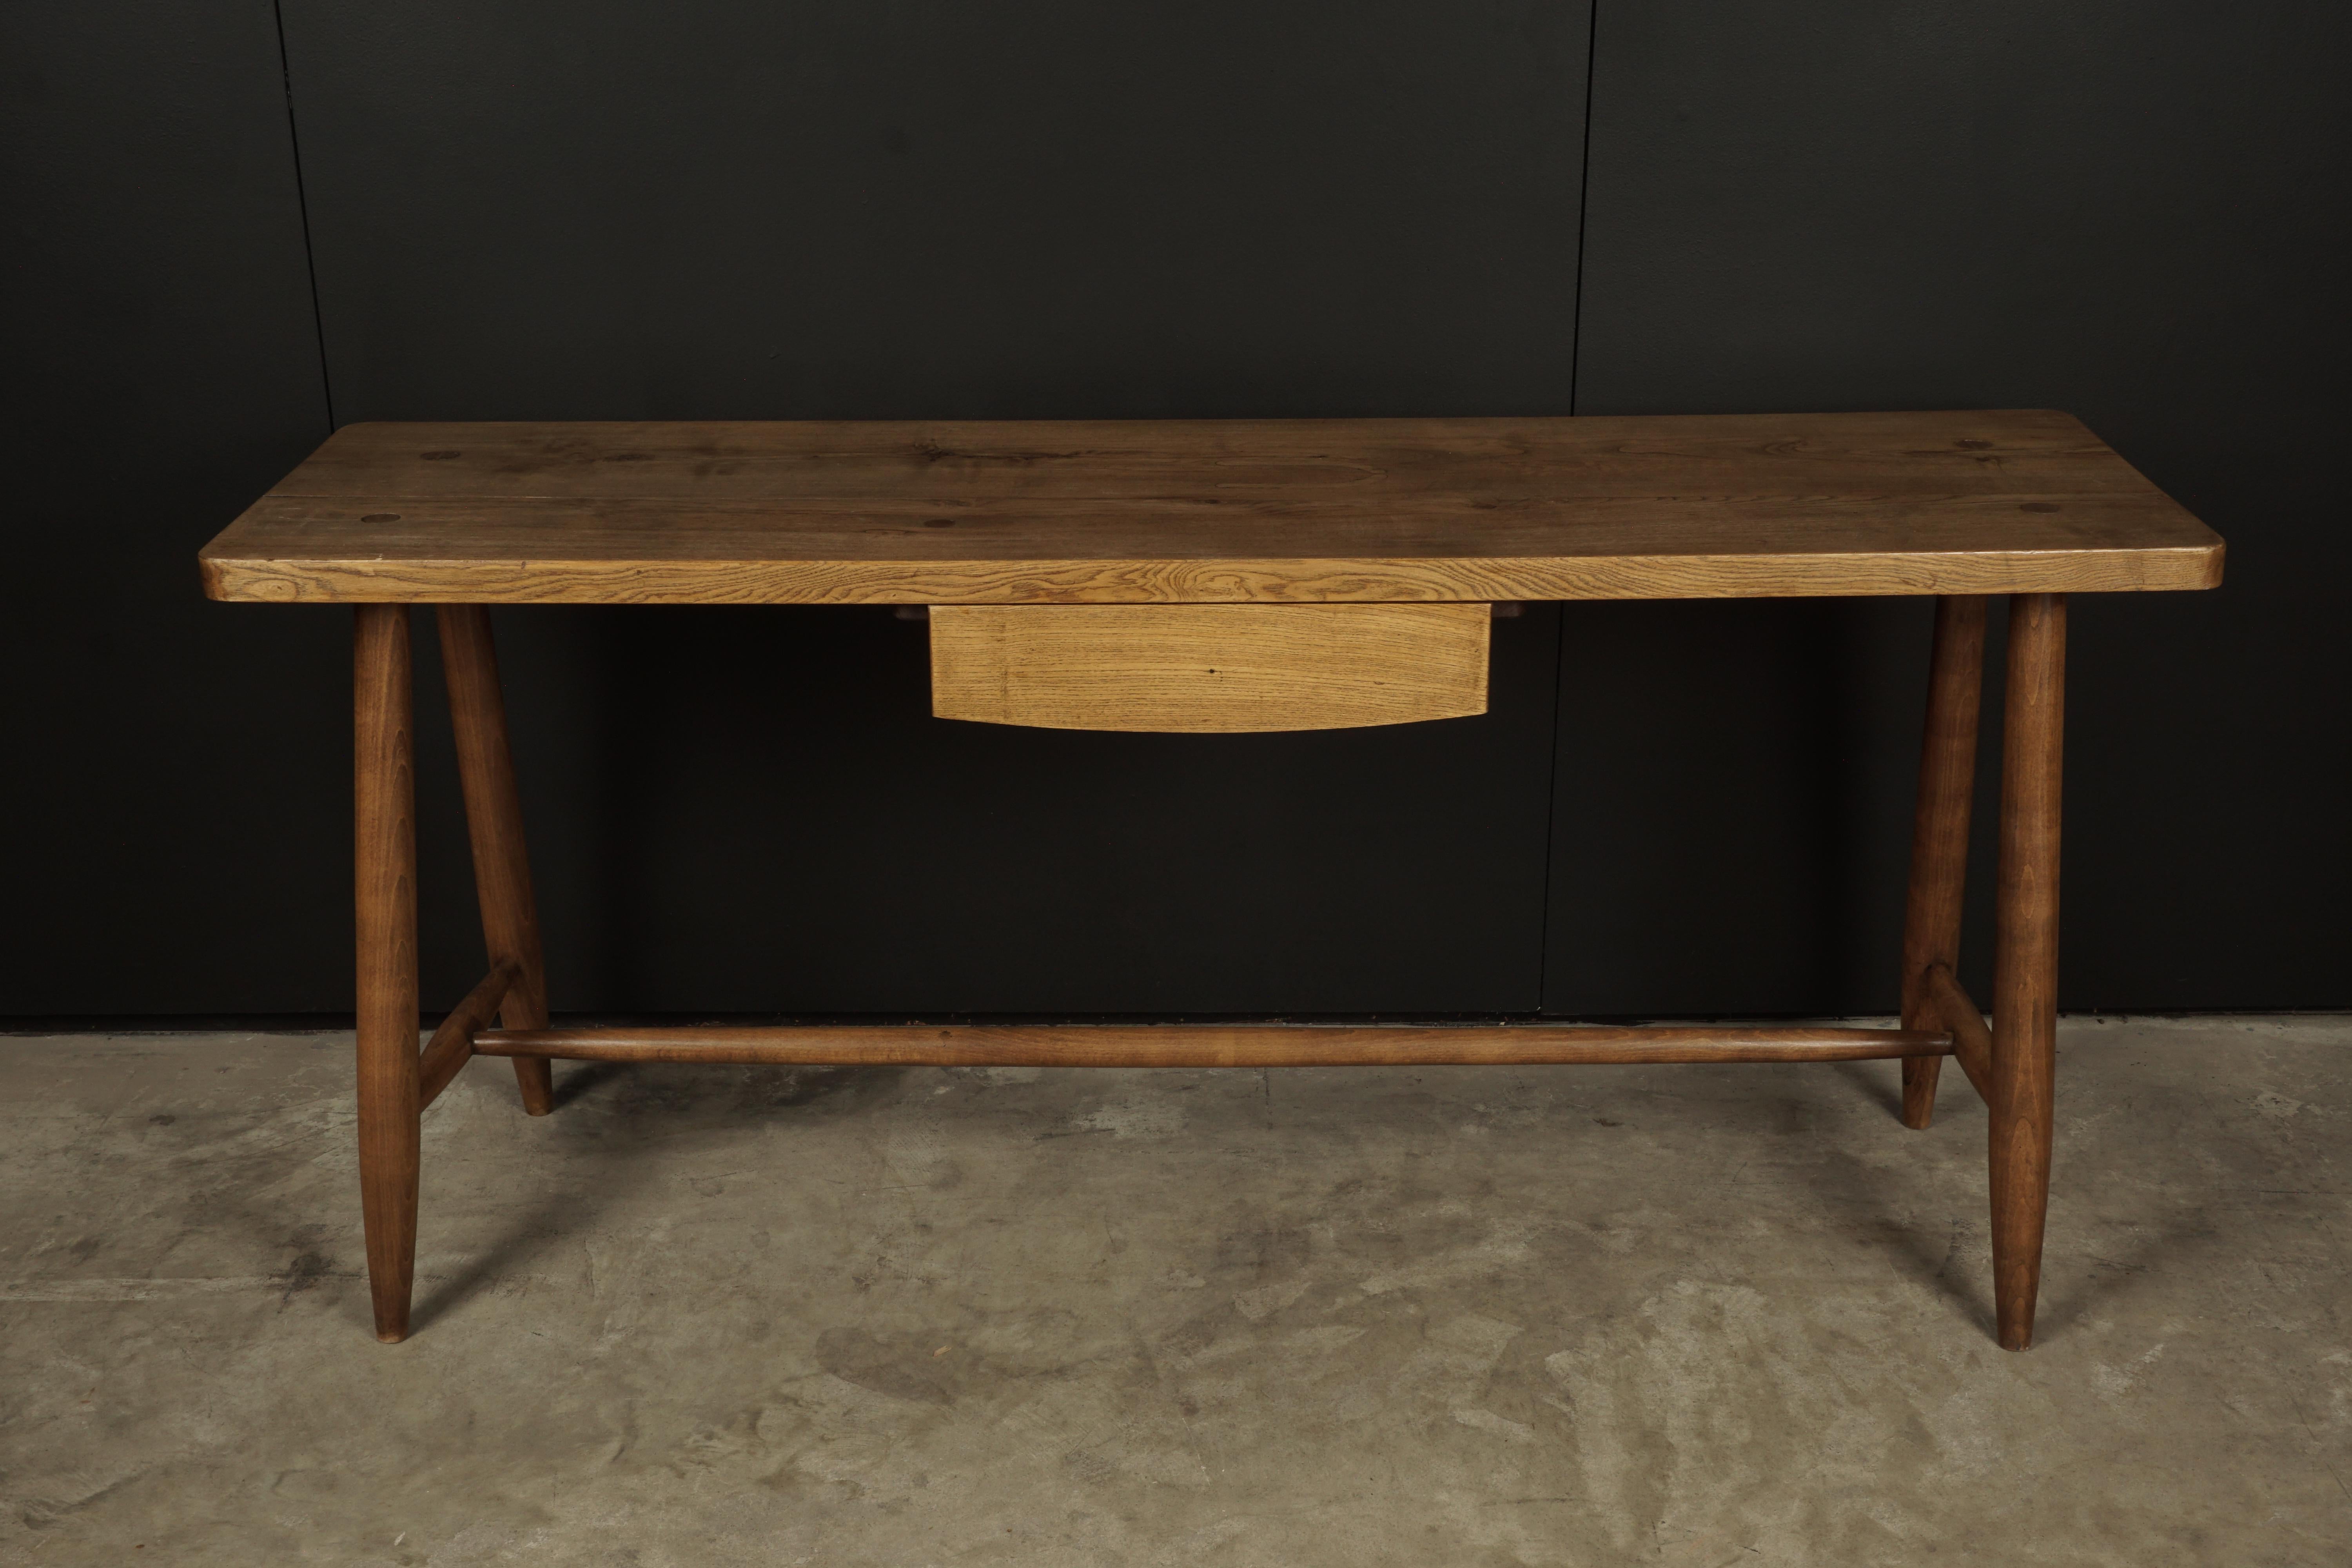 Rare modern console in oak from France, 1960s. Solid oak construction with light patina and wear.